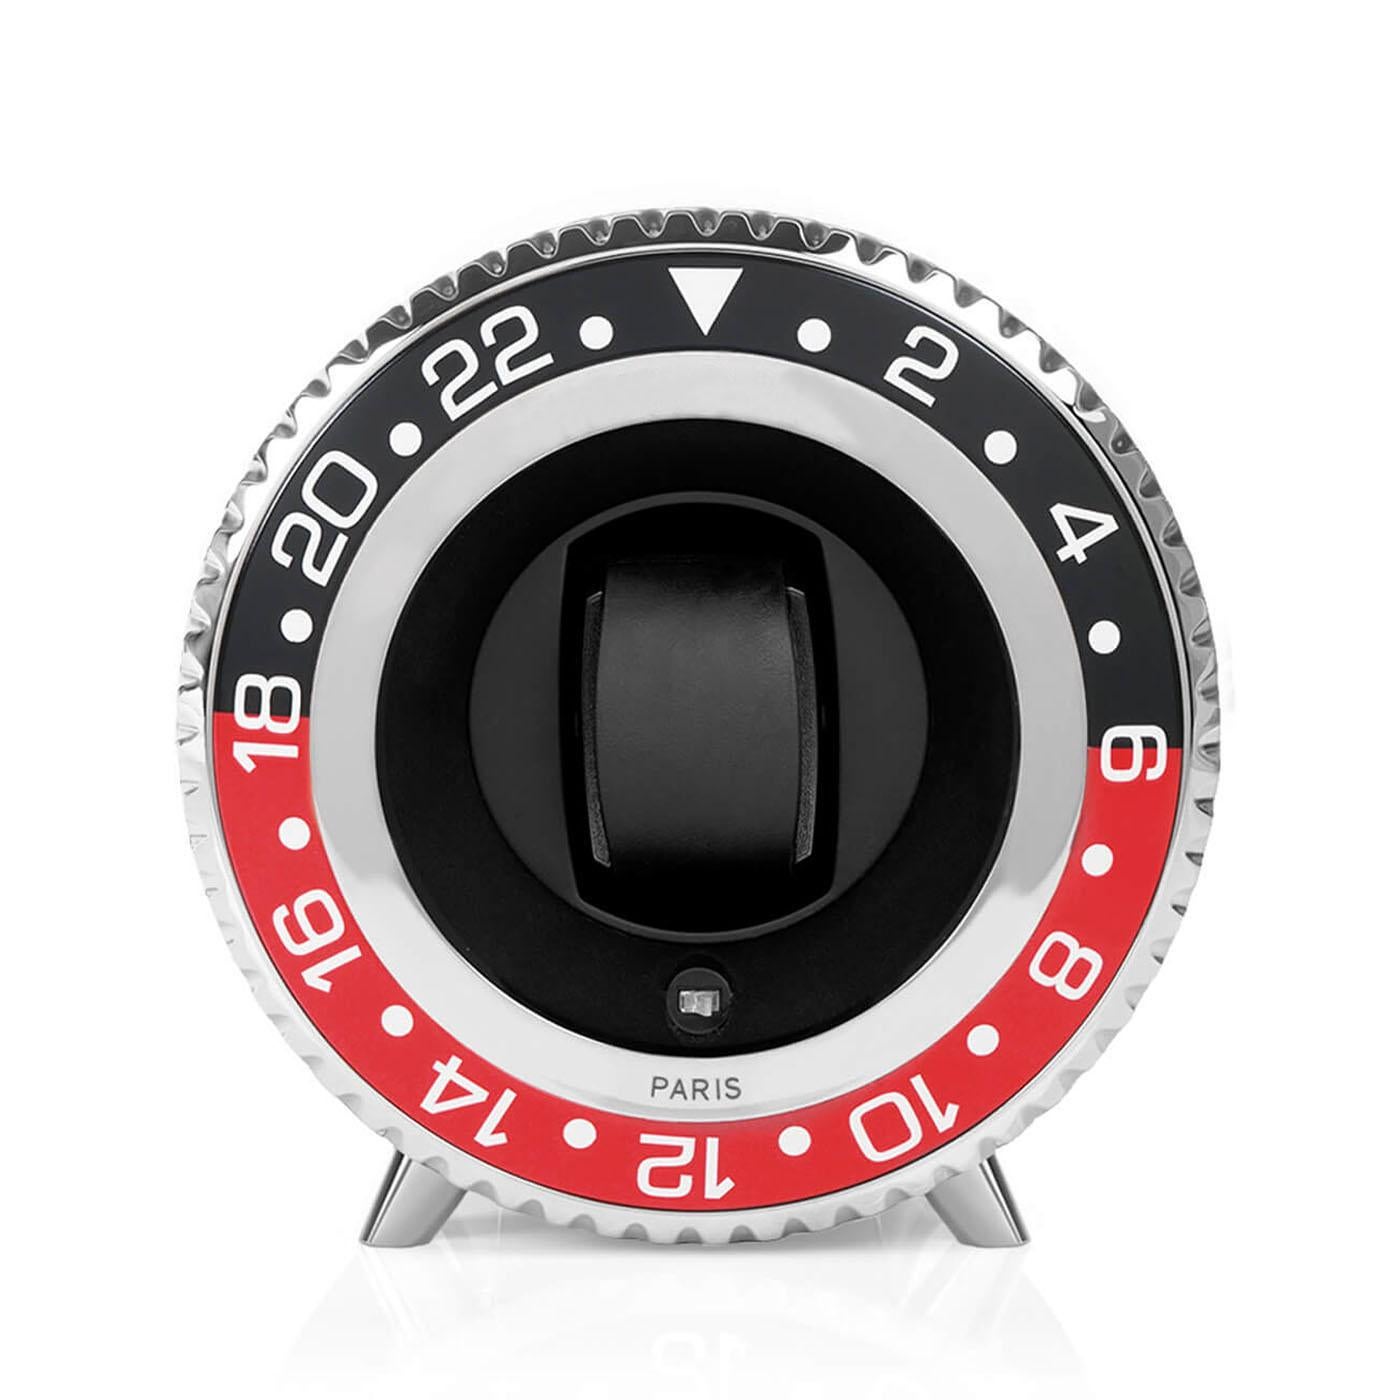 Watch winder black and red notched with bezel in black and red aluminium,
structure in aluminium in nickel finish. Rotating small case for automatic watches
covered with notched blackened aluminium in nickel finish. Integrated watch
winder with a